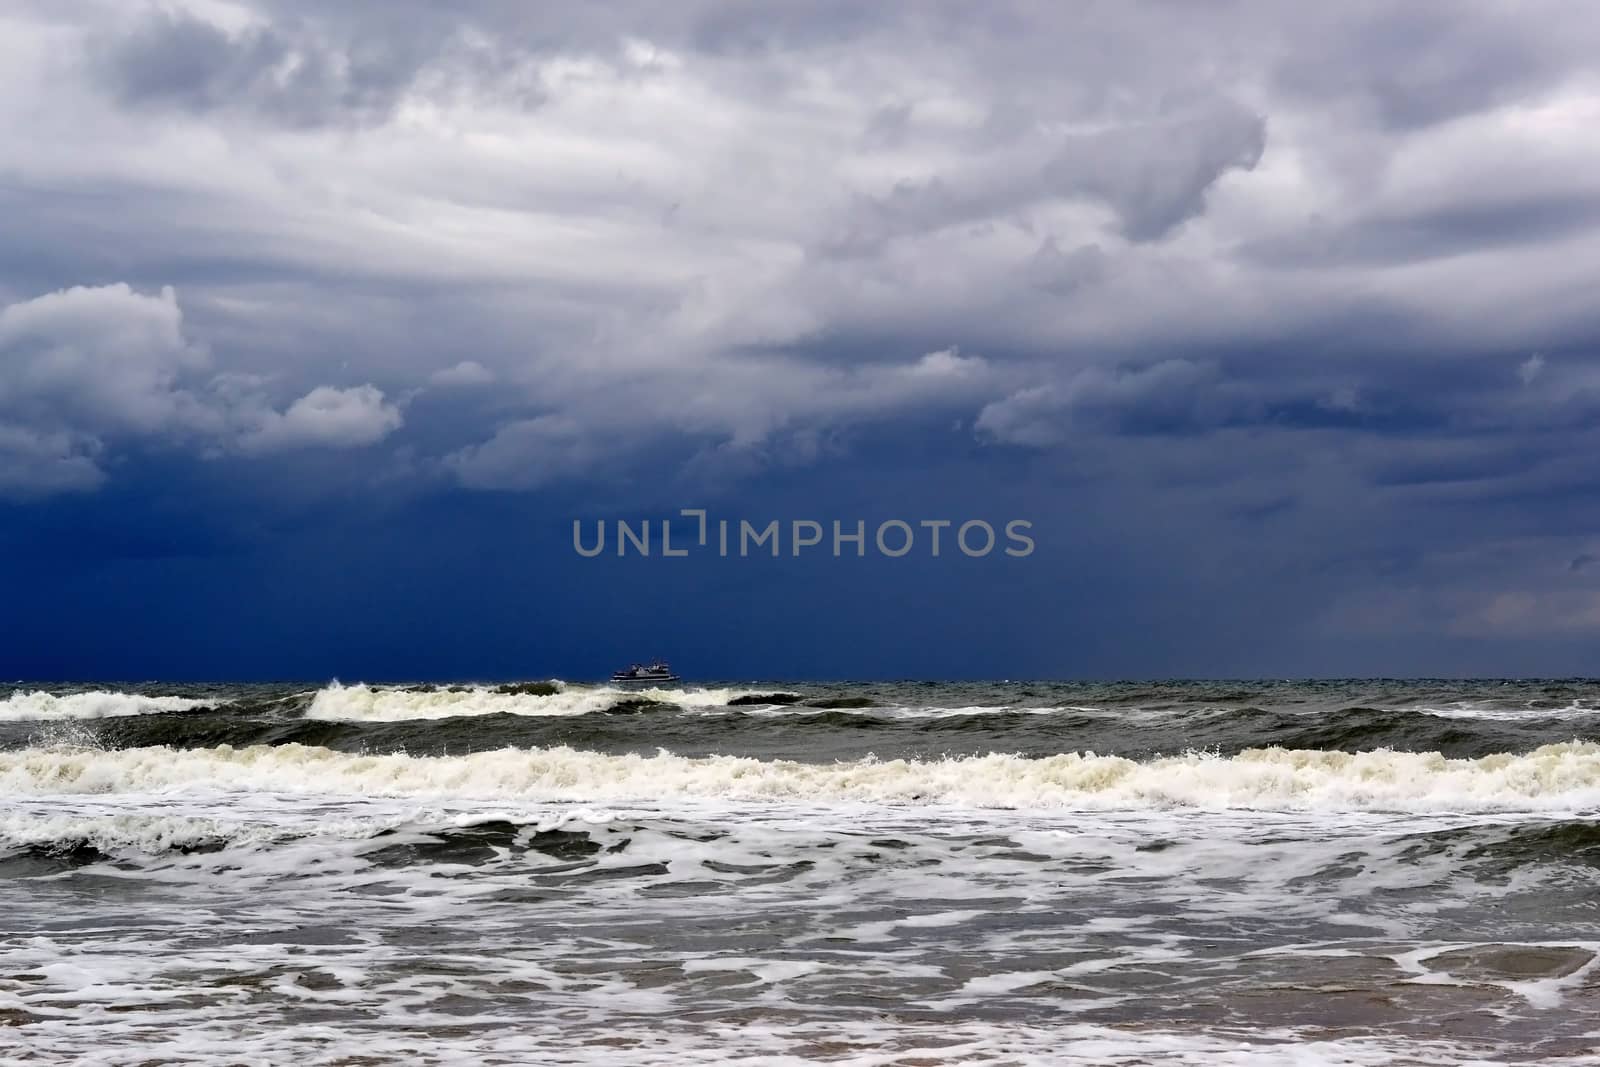 Waves of the Black Sea in rainy weather. by veronka72